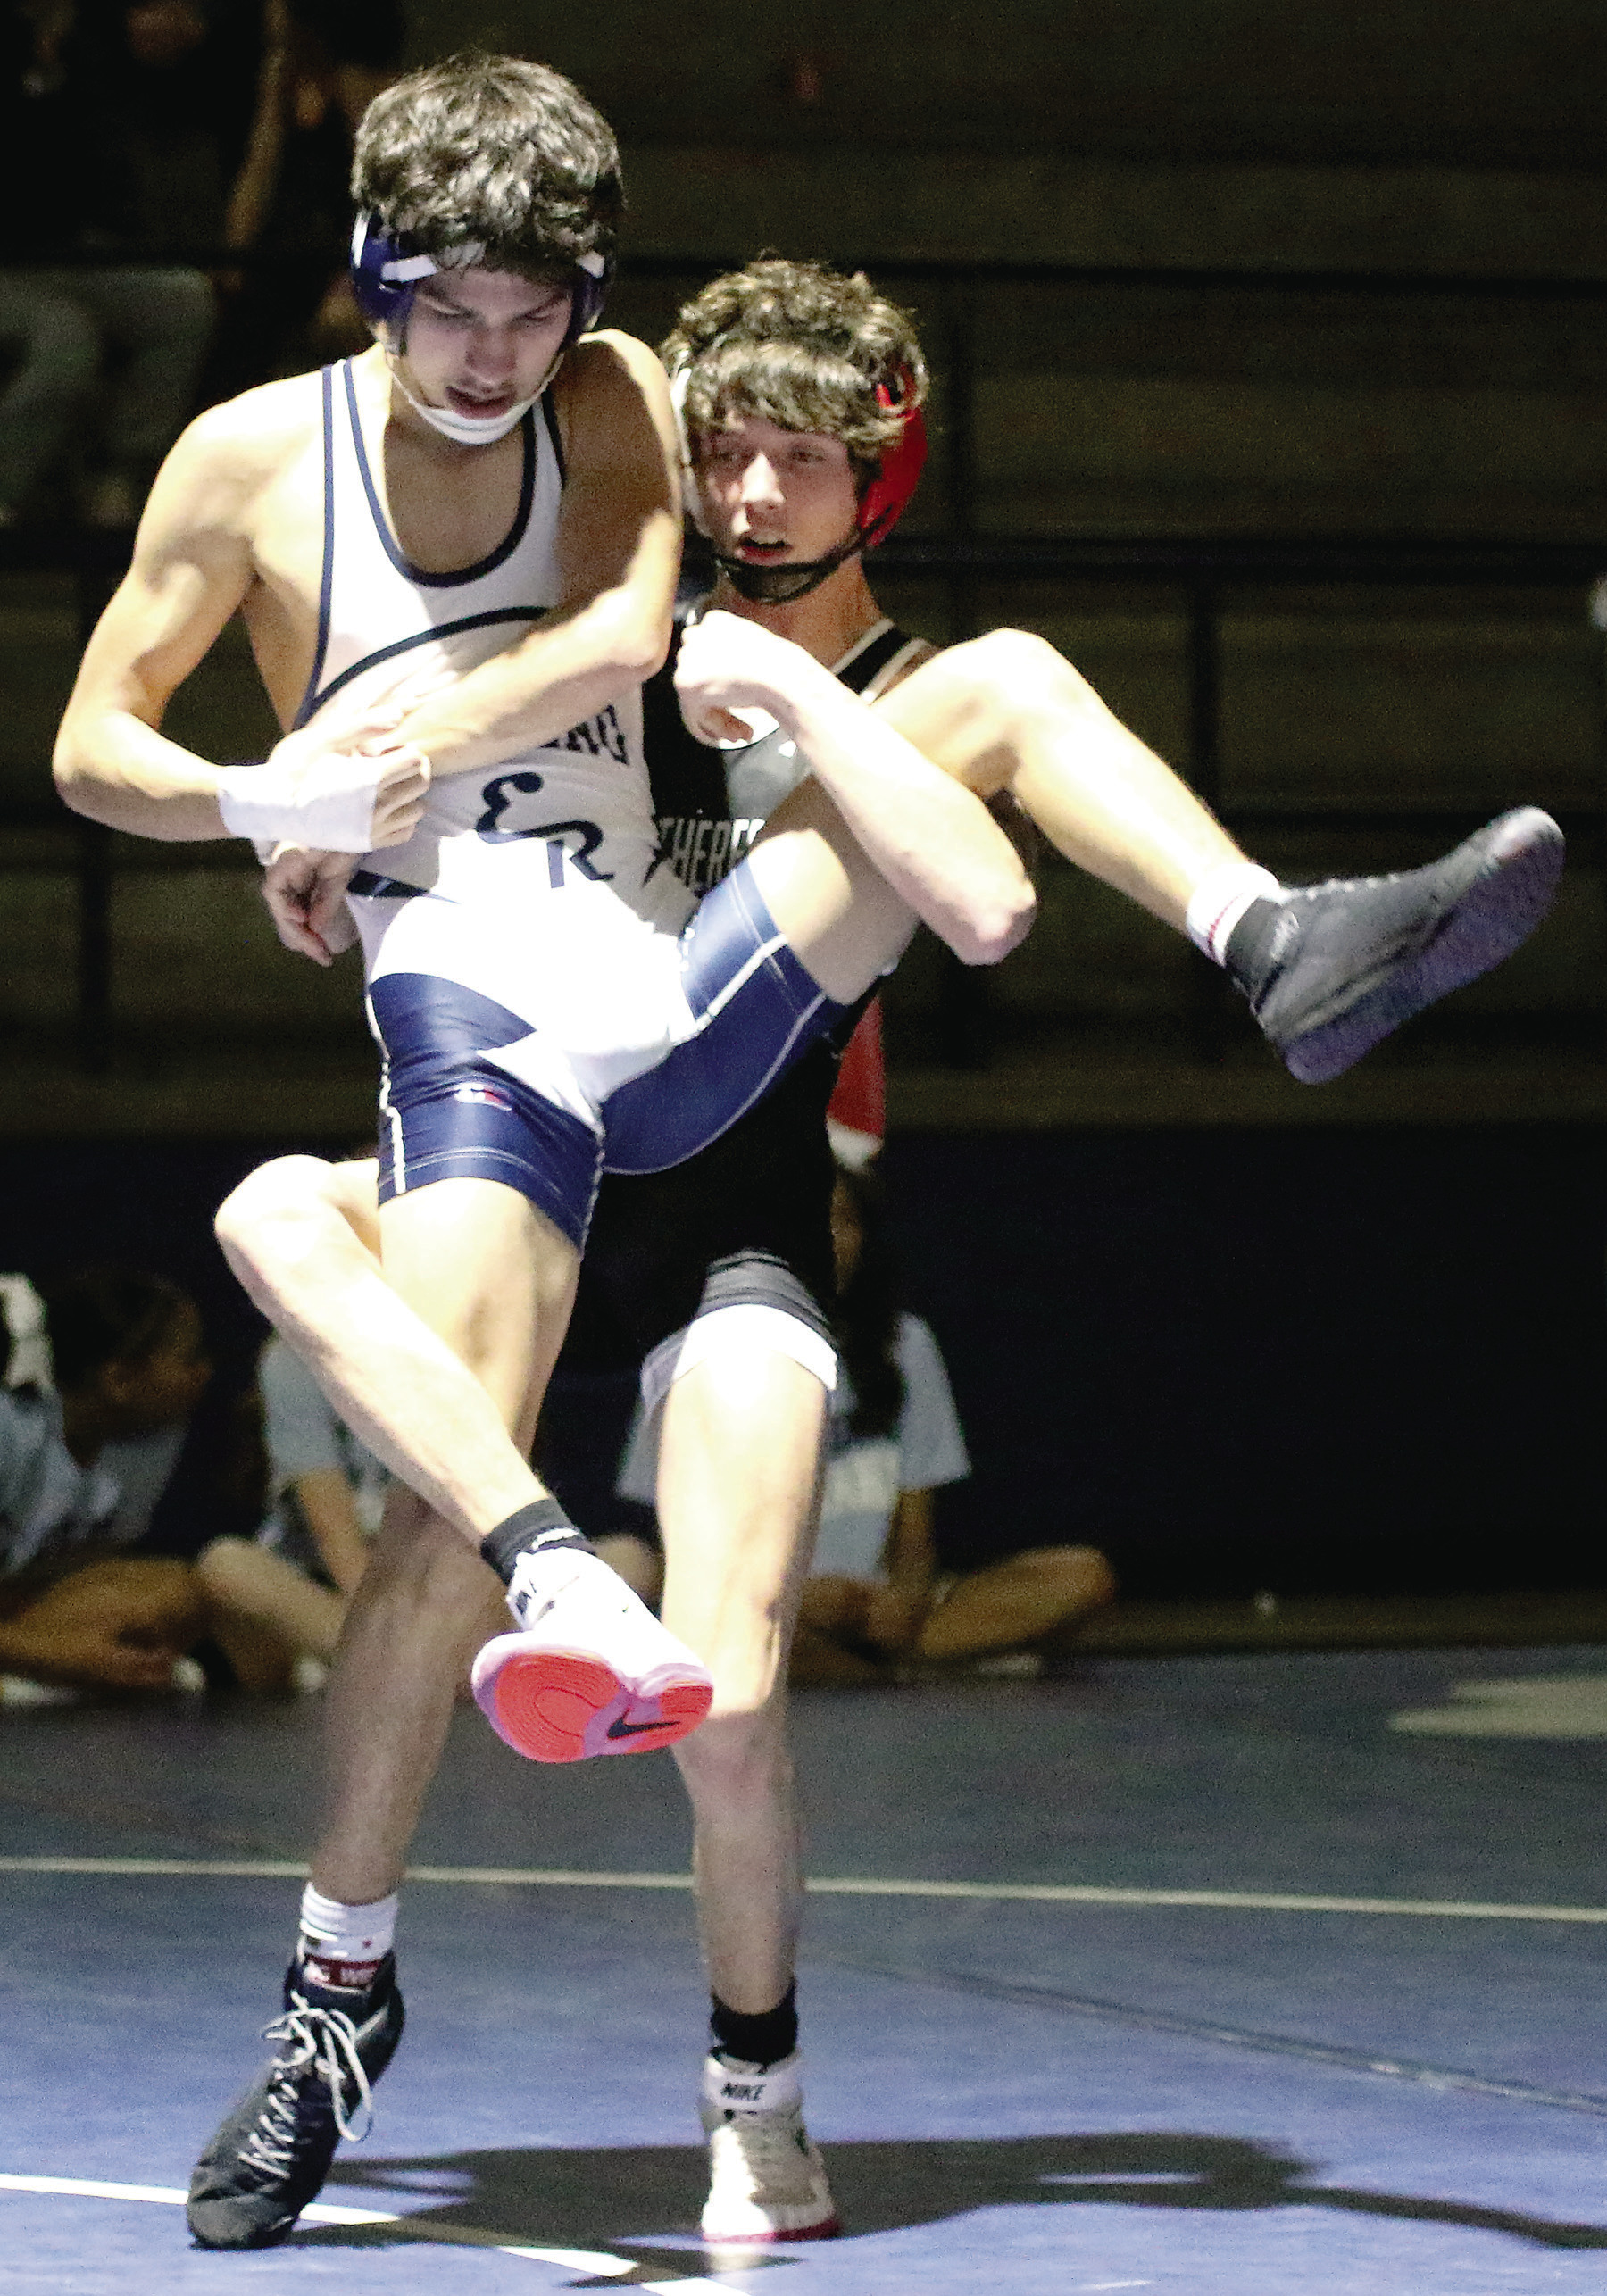 Above, Creek Williams tries to pin his opponent during Tuesday’s dual at El Reno. At left, Dylan Renna lifts his opponent for a possible takedown during Weatherford’s dual at El Reno.